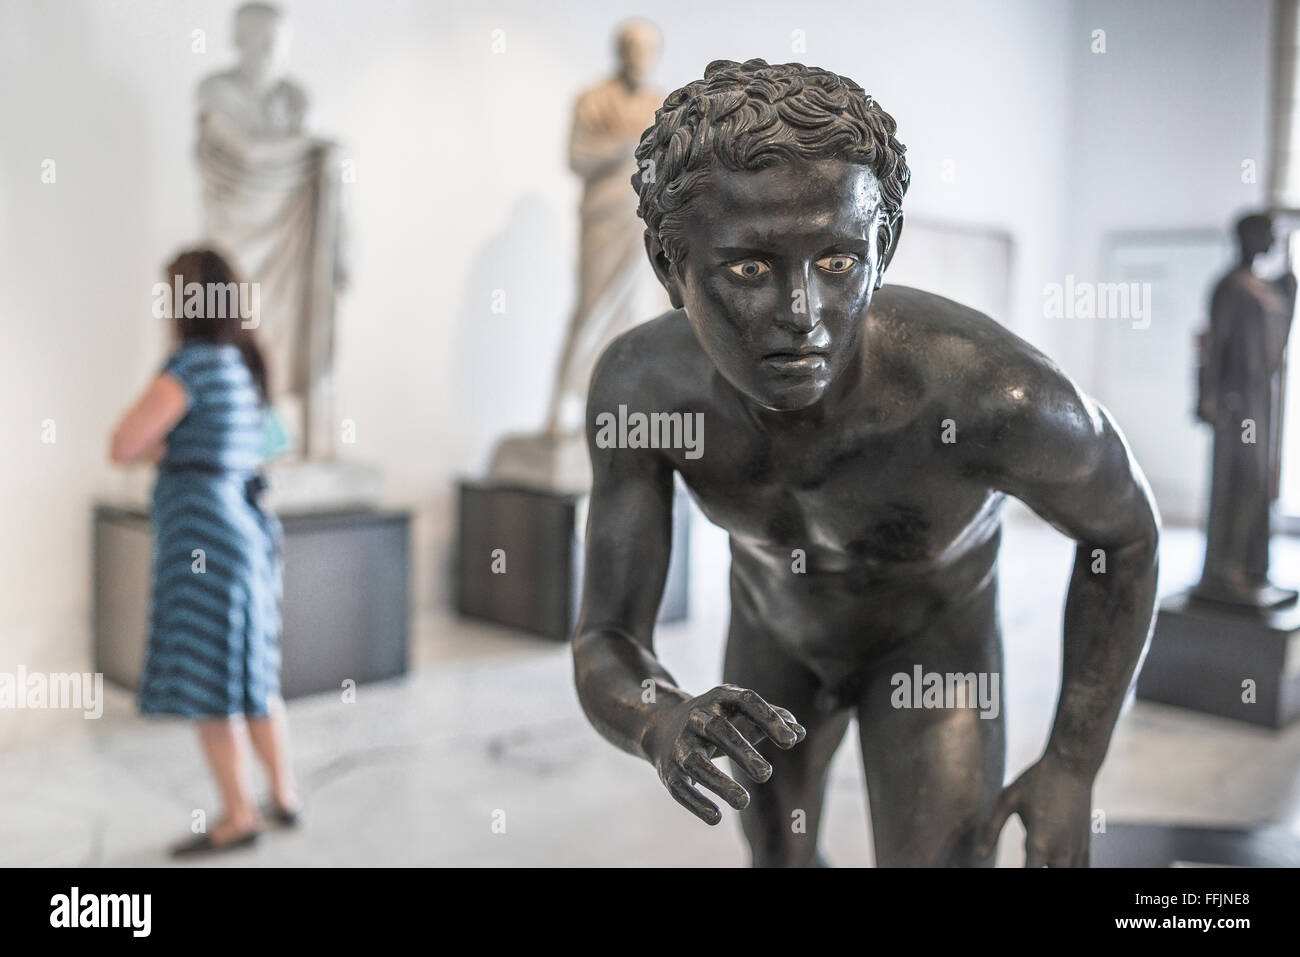 Naples archaeological museum, view of a statue from the ancient roman period of an athlete in the Museo Archeologico Nazionale in Naples, Italy. Stock Photo